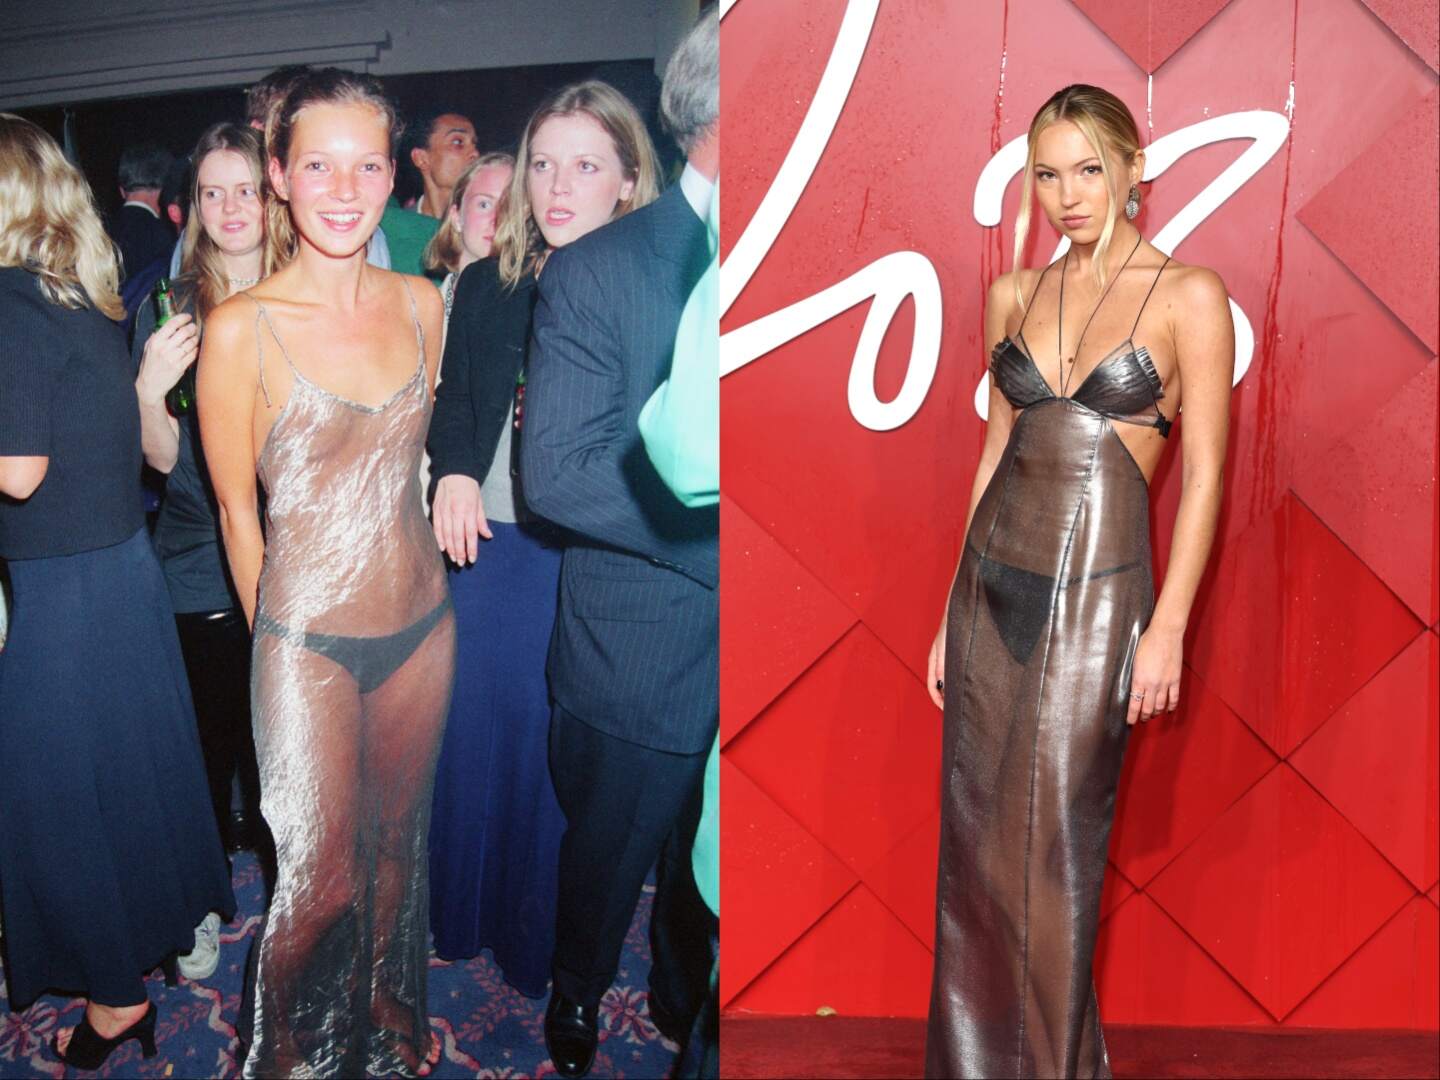 A photo of English supermodel Kate Moss wearing a diaphanous silver dress alongside a photo of Kate's daughter Lila Moss wearing the same dress 30 years later